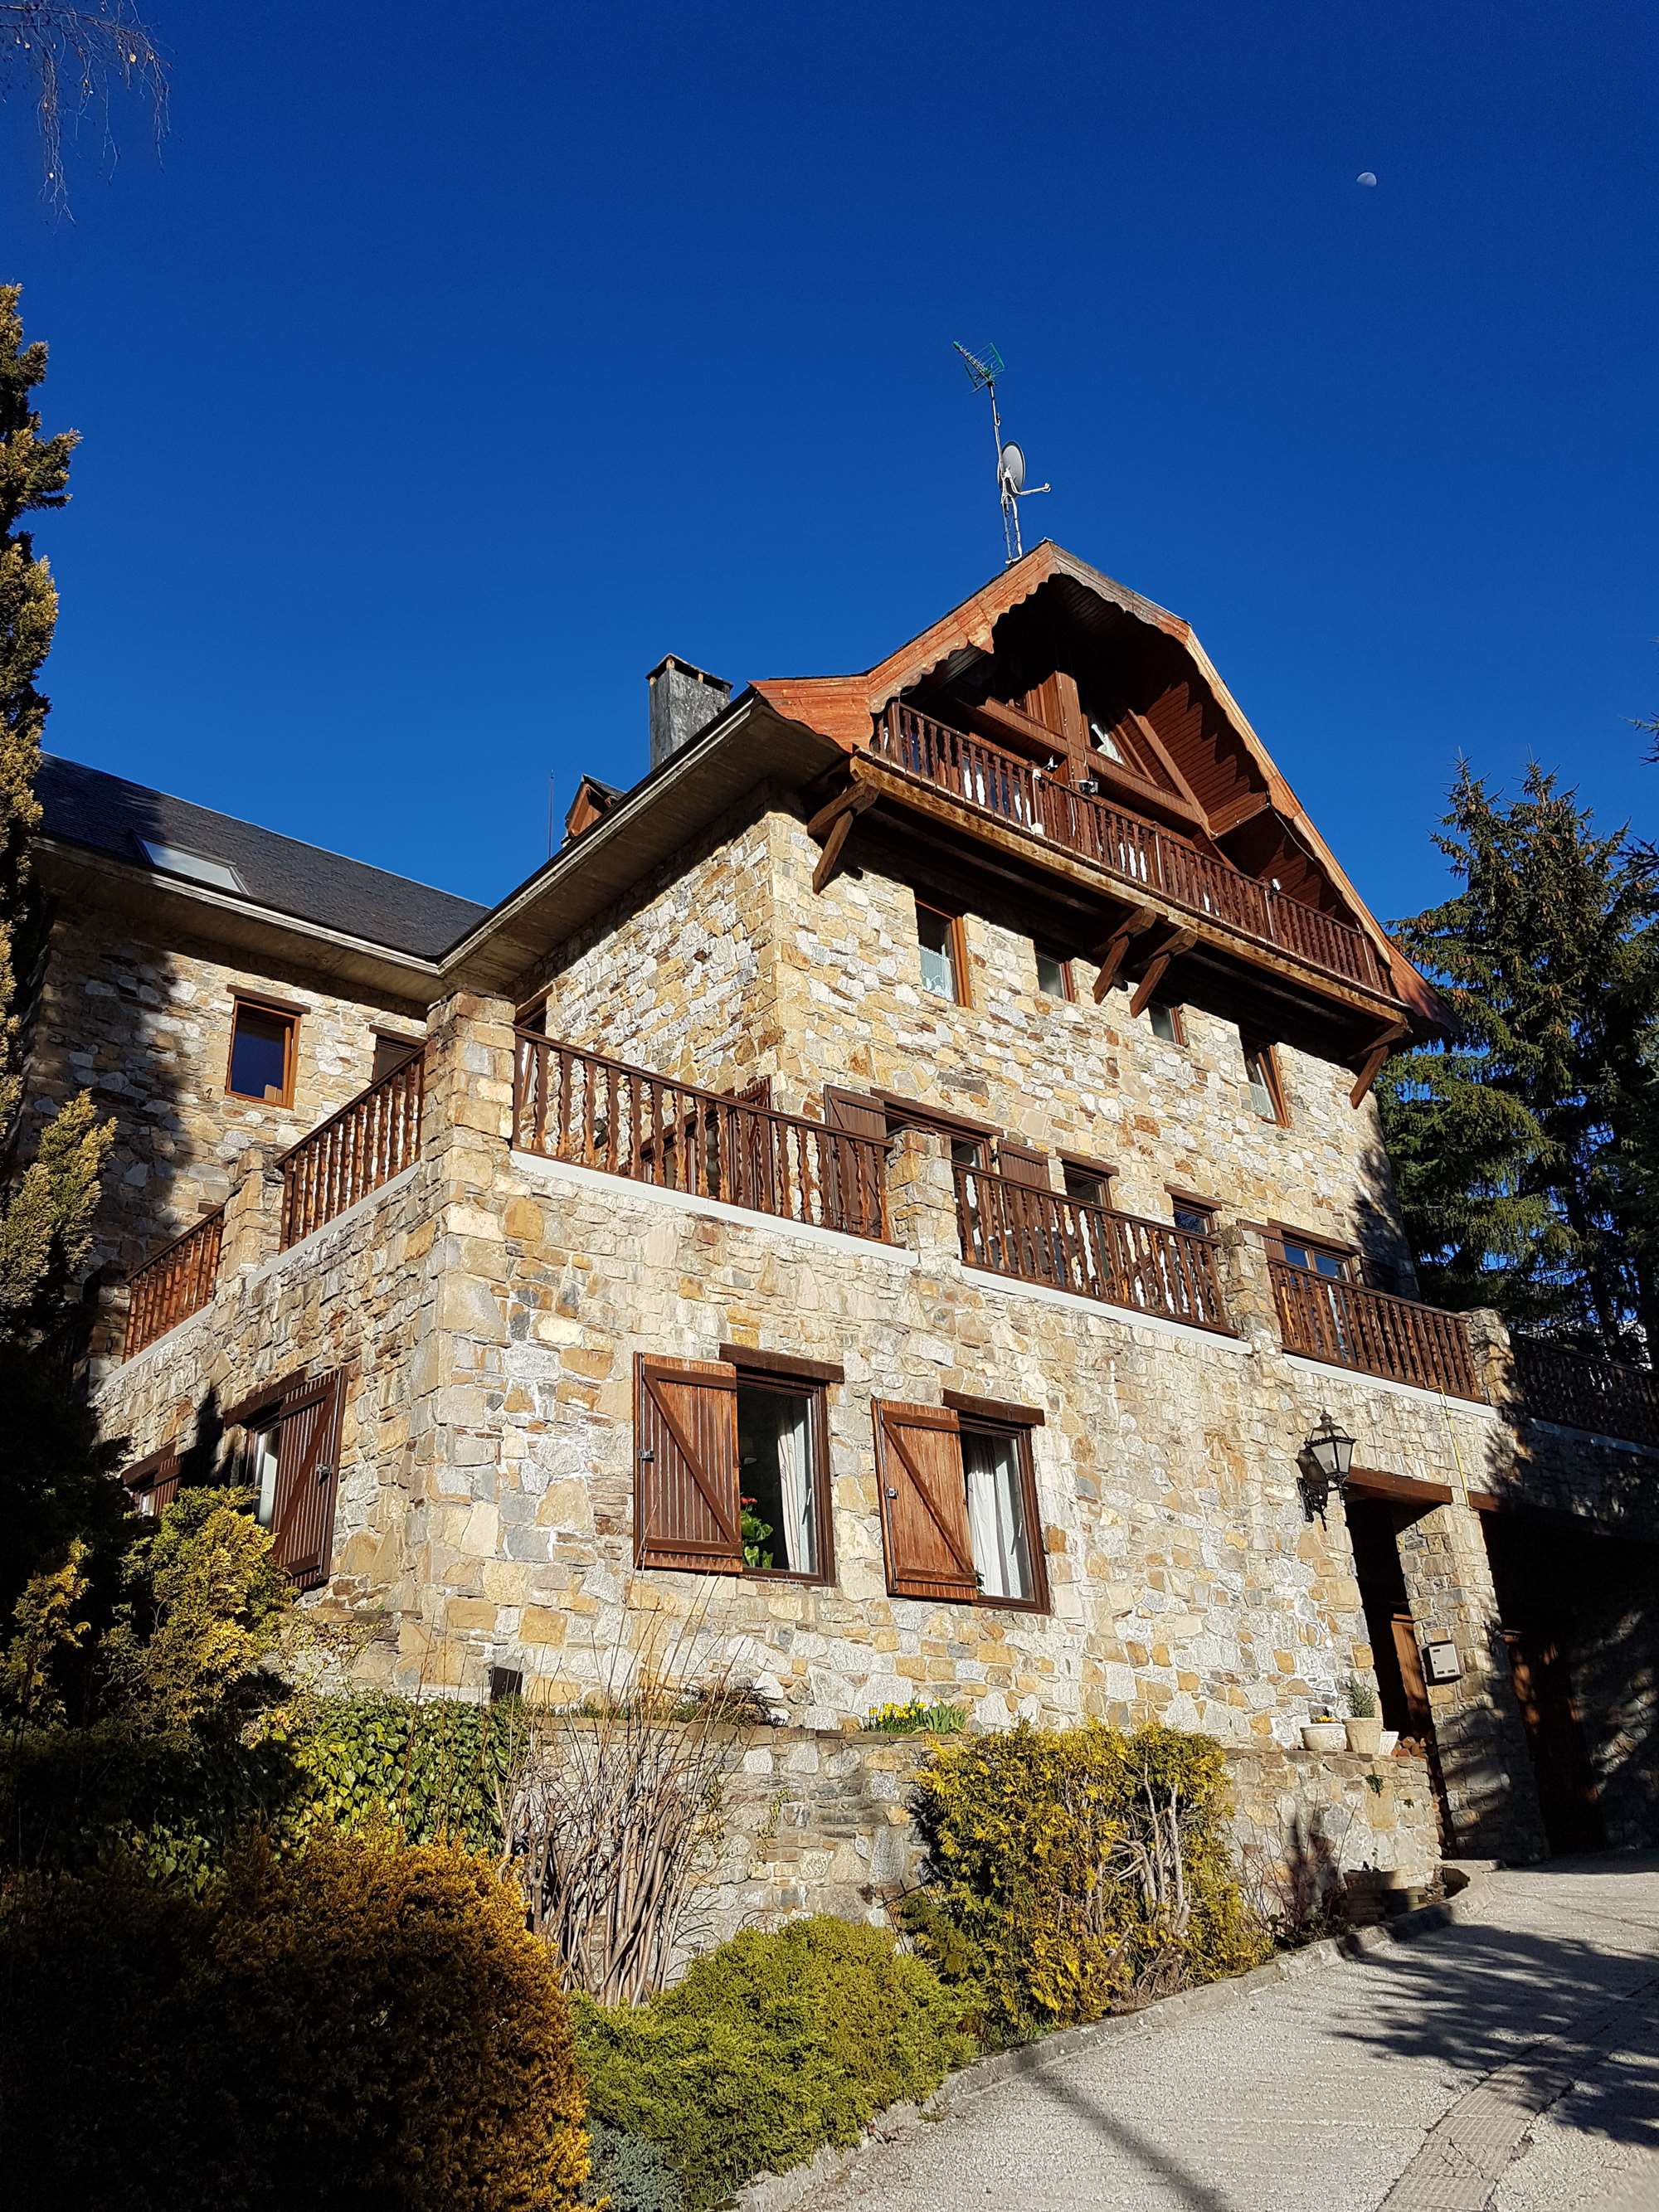 The Chalet Salana in Baqueira